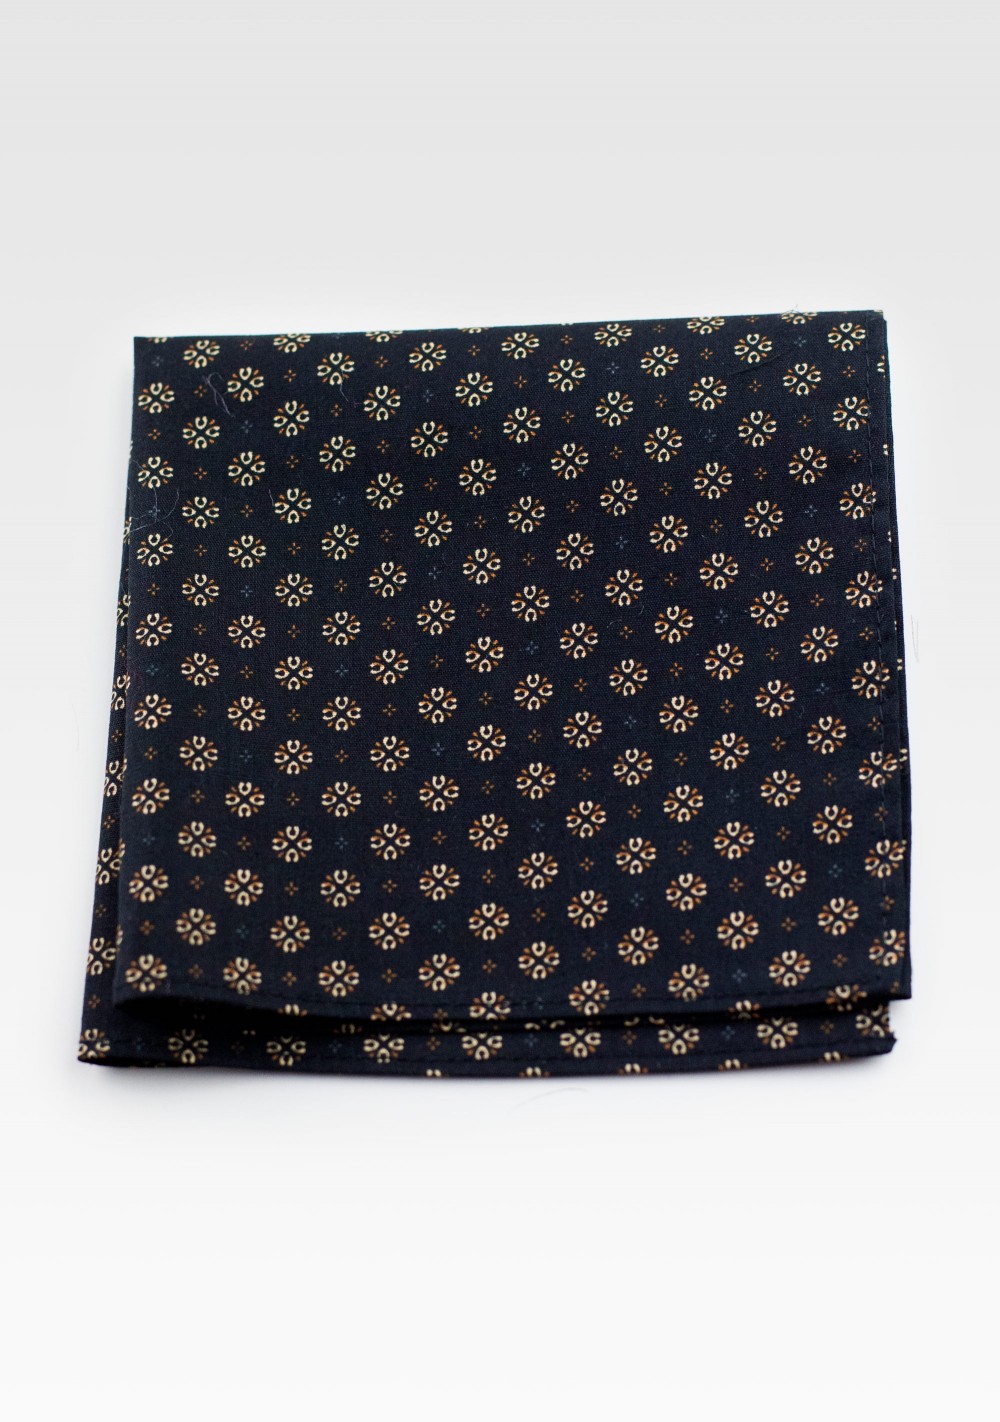 Geometric Pocket Square Hanky in Black and Gold